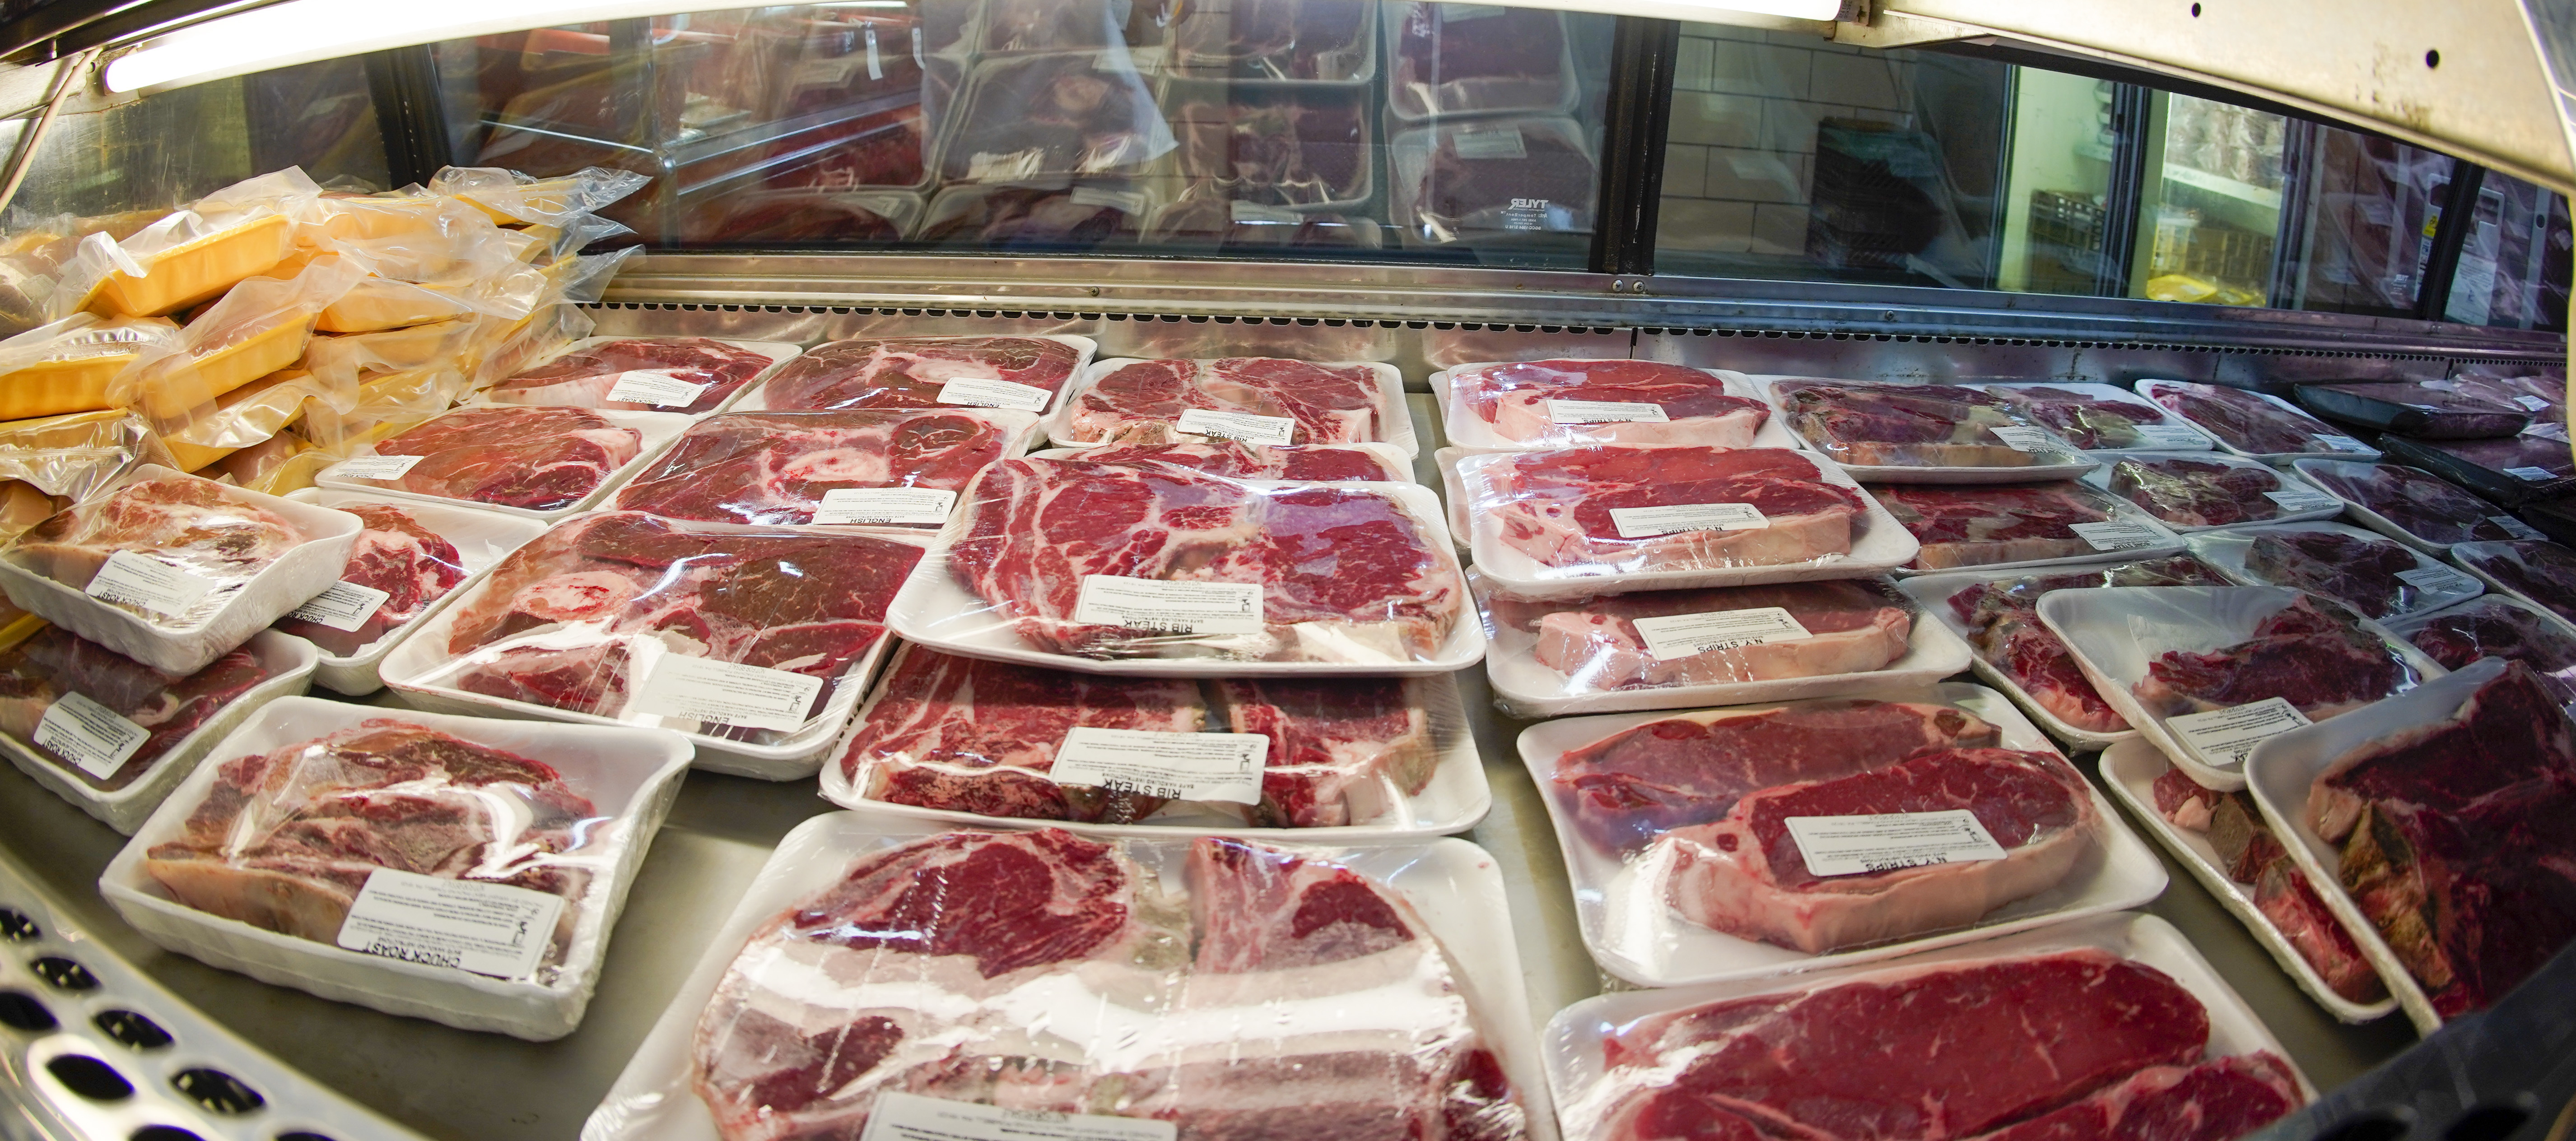 Major supermarket chains changed how they label meat, surprising